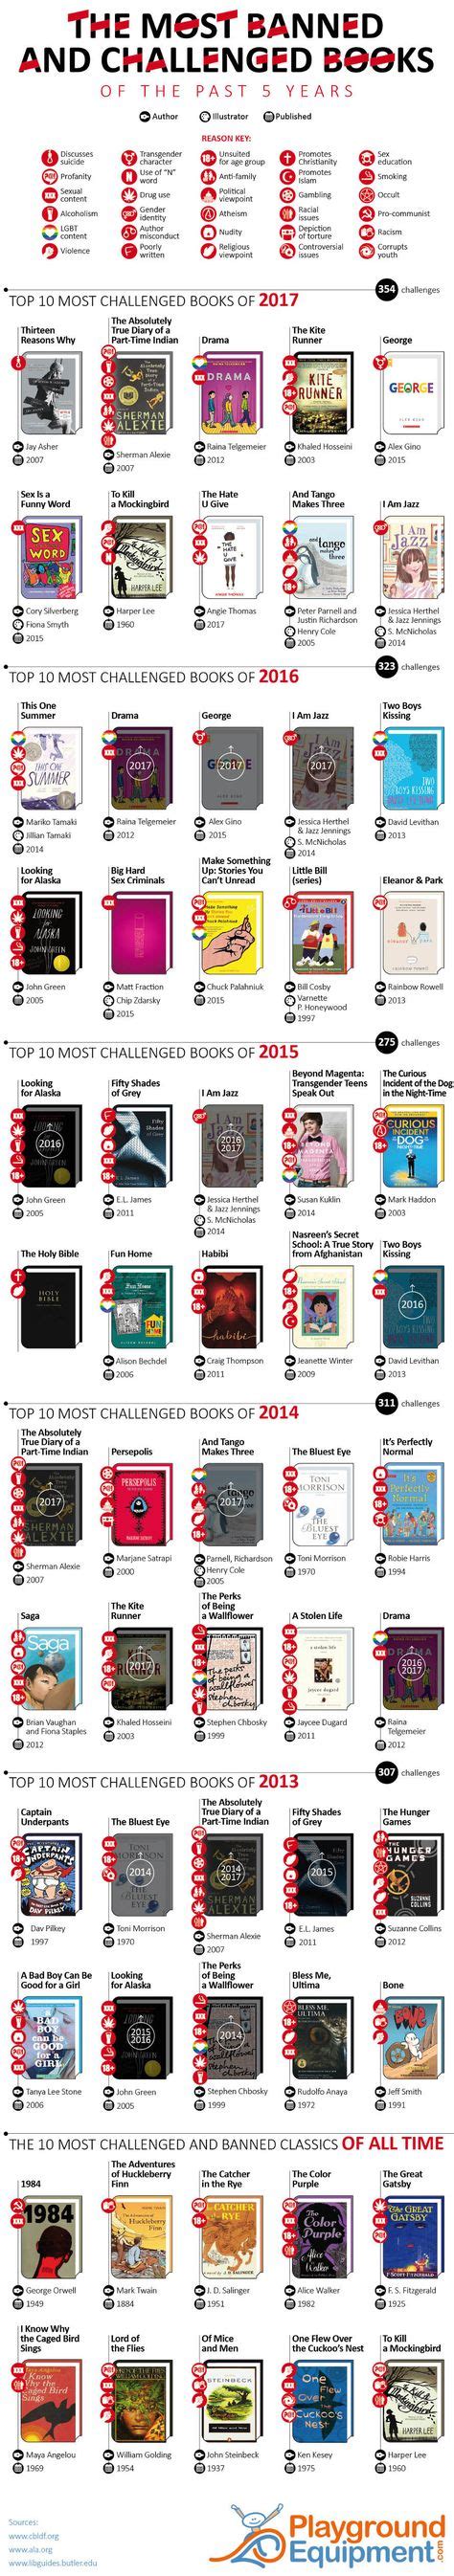 The Most Challenged And Banned Books Of America Books Infographic I Love Books